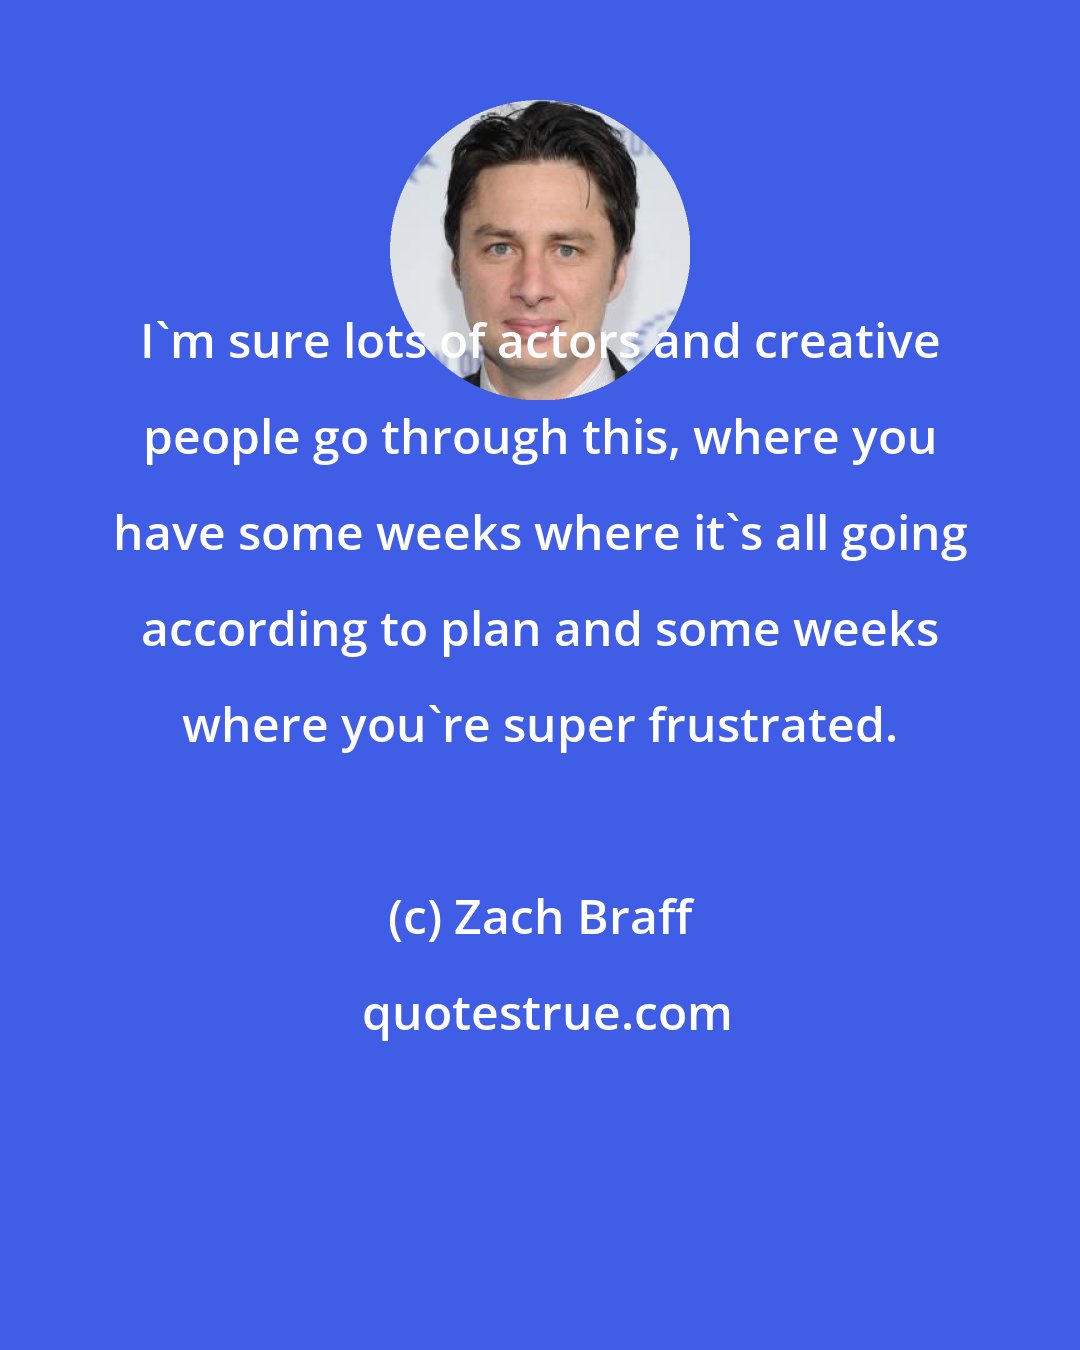 Zach Braff: I'm sure lots of actors and creative people go through this, where you have some weeks where it's all going according to plan and some weeks where you're super frustrated.